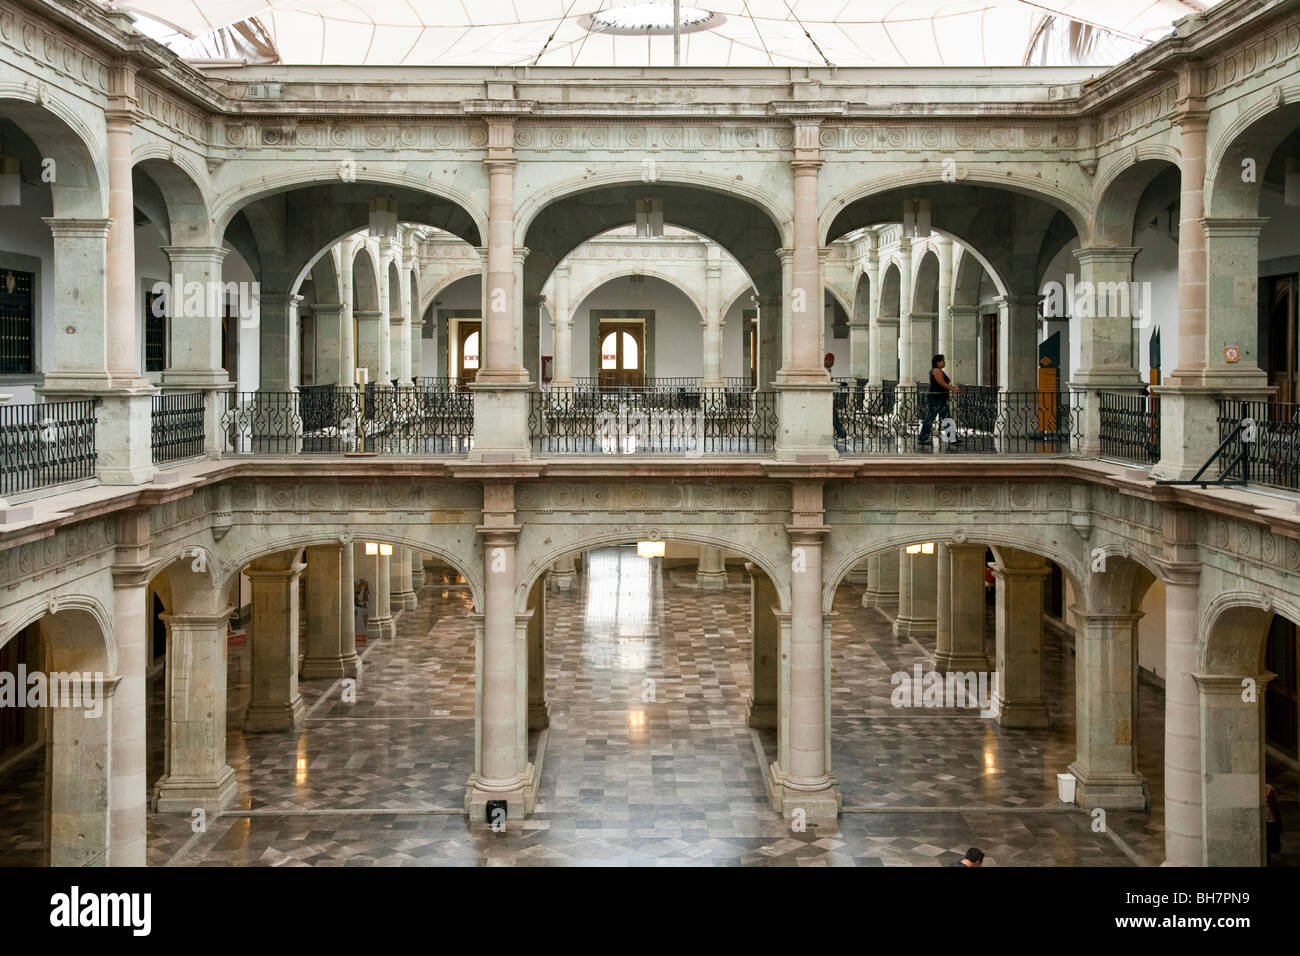 light filled interior courtyard inside stone neoClassical style Governors Palace now used mainly as museum Oaxaca Mexico Stock Photo